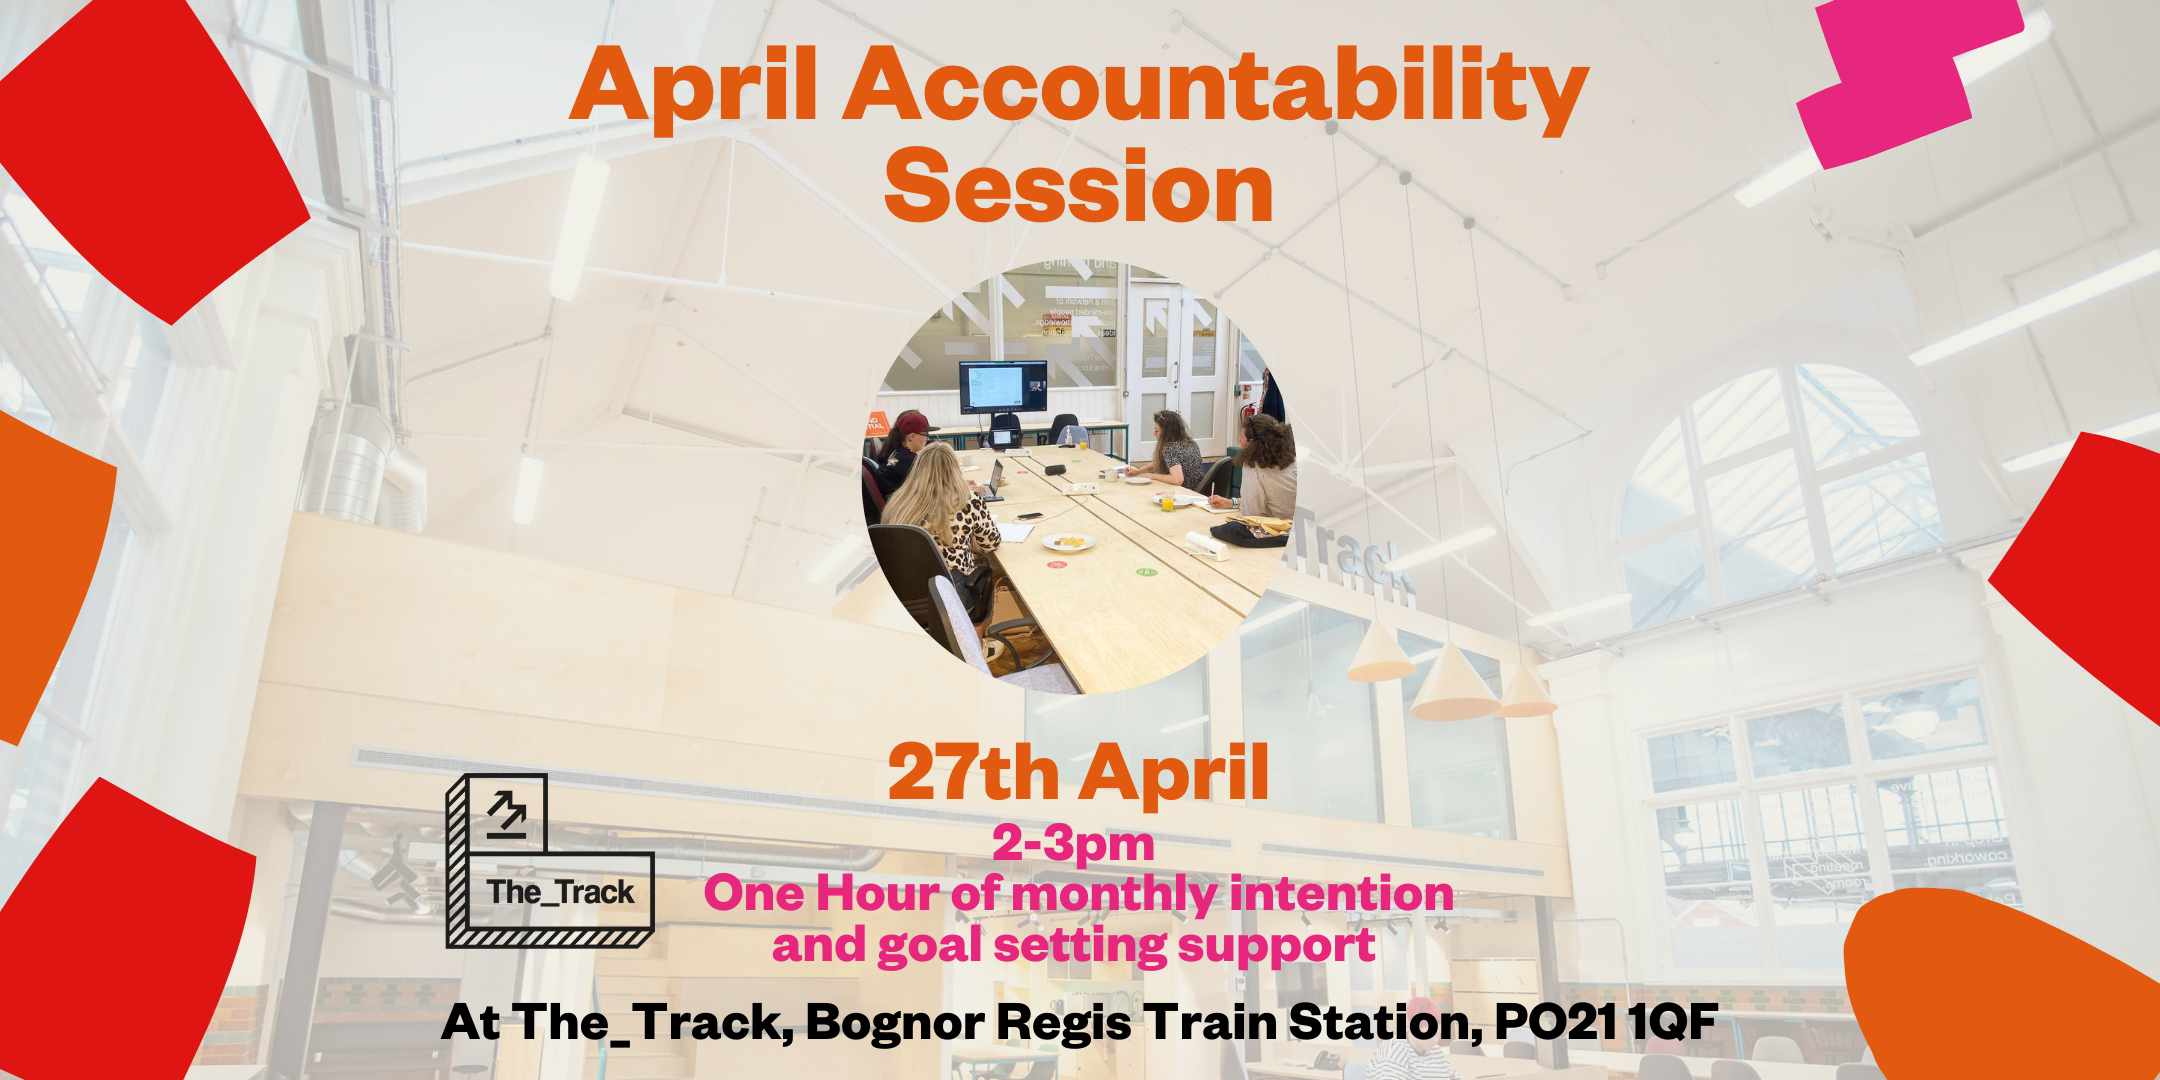 The_Track's April Accountability session with a picture of a previous event in the centre in the shape of a circle, with people sat round a table. The poster reads "April Accountability Session. 27th April, 2-3pm. One hour of monthly intention and goal setting support. At The_Track, Bognor Regis Train Station, PO21 1QF".